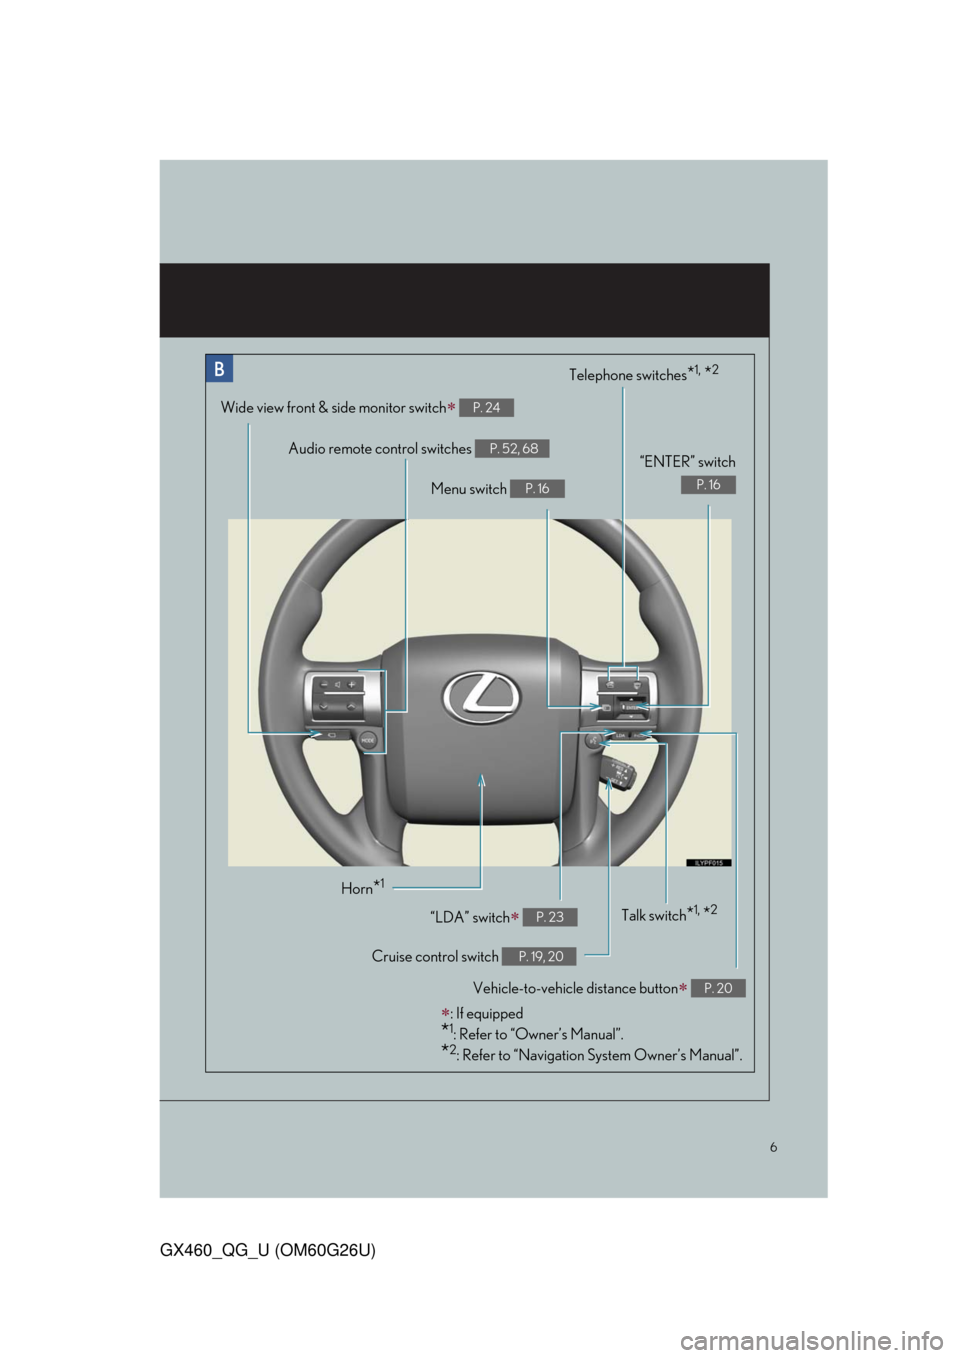 Lexus GX460 2011  Intuitive Parking Assist / LEXUS 2011 GX460 OWNERS MANUAL QUICK GUIDE (OM60G26U) 6
GX460_QG_U (OM60G26U)
Audio remote control switches P. 52, 68
Telephone switches*1, *2
Menu switch P. 16
“ENTER” switch
P. 16
Wide view front & side monitor switch P. 24
Horn*1
Talk switch*1,